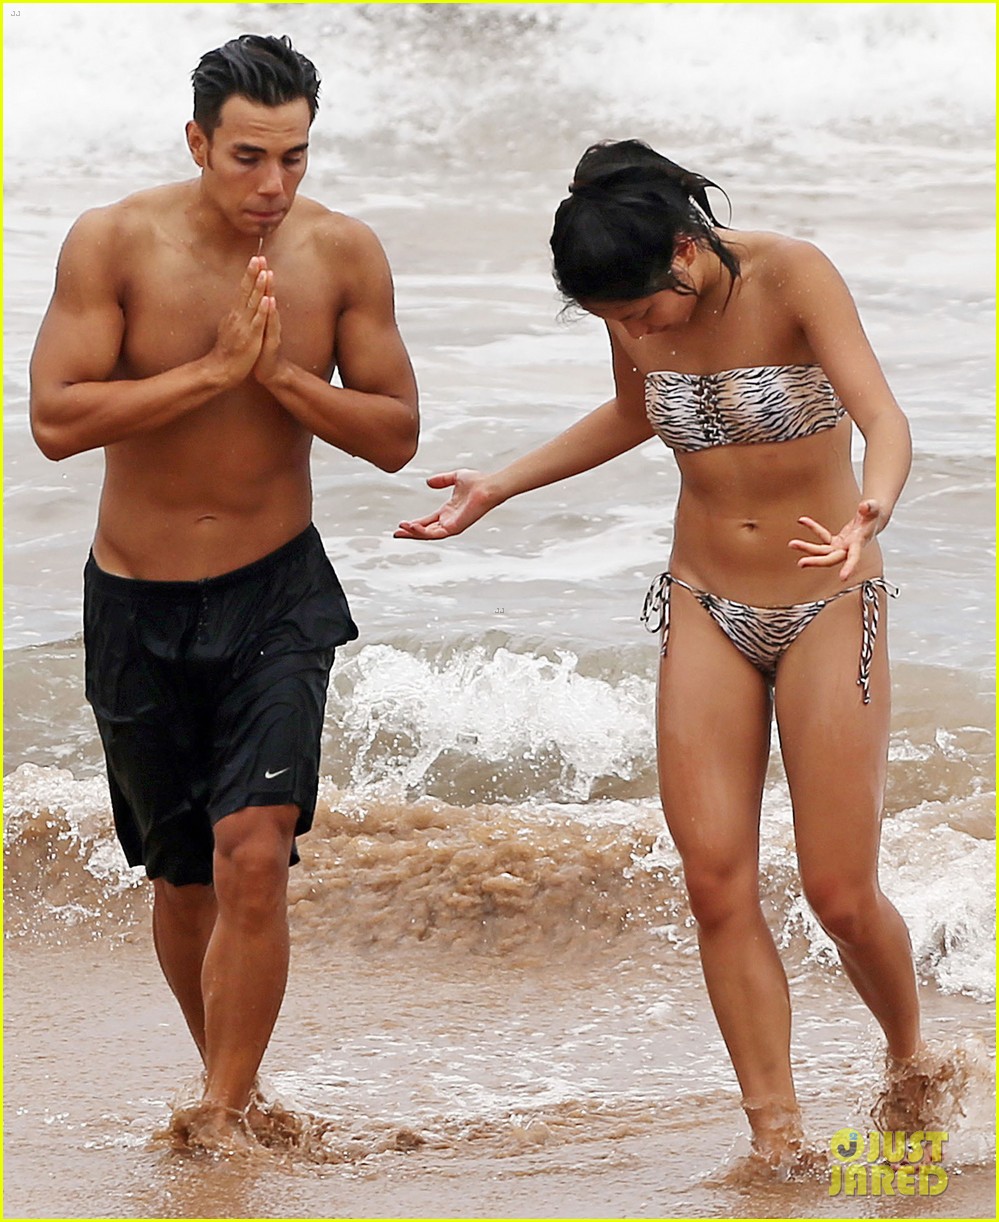 Apolo Ohno shows off his shirtless body while frolicking in the ocean with ...